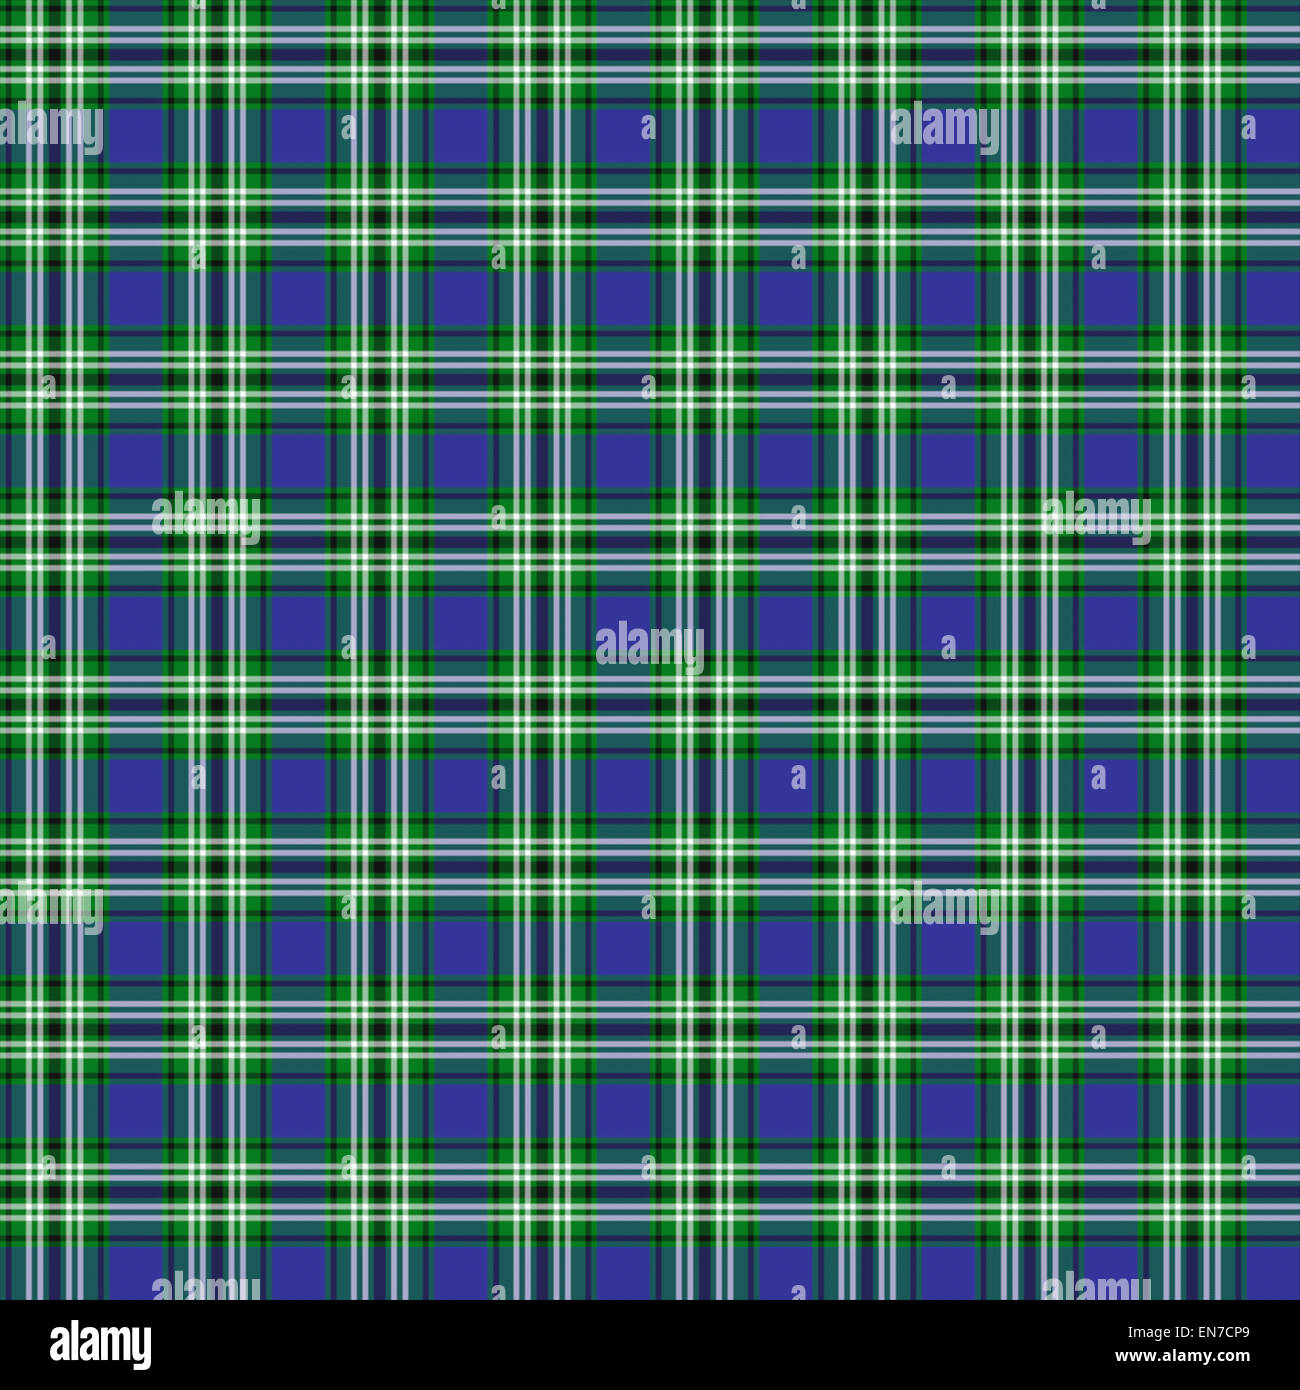 A seamless patterned tile of the clan Learmonth tartan. Stock Photo